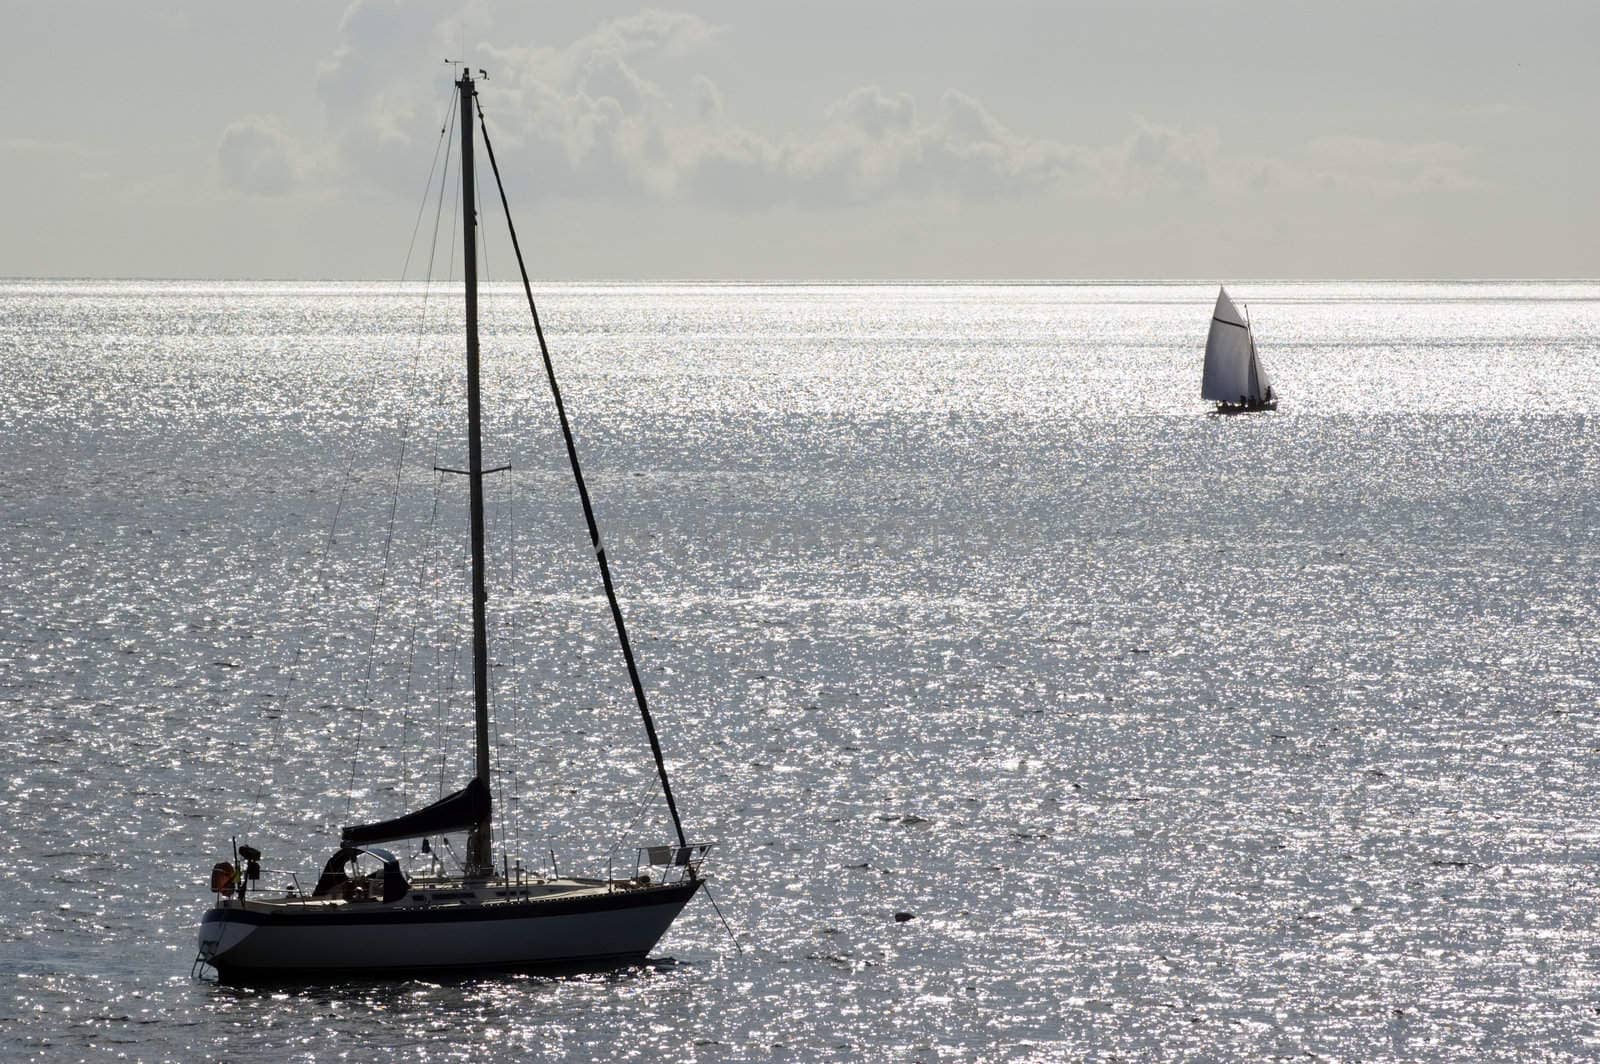 Sailing boat moored in a shinning sea